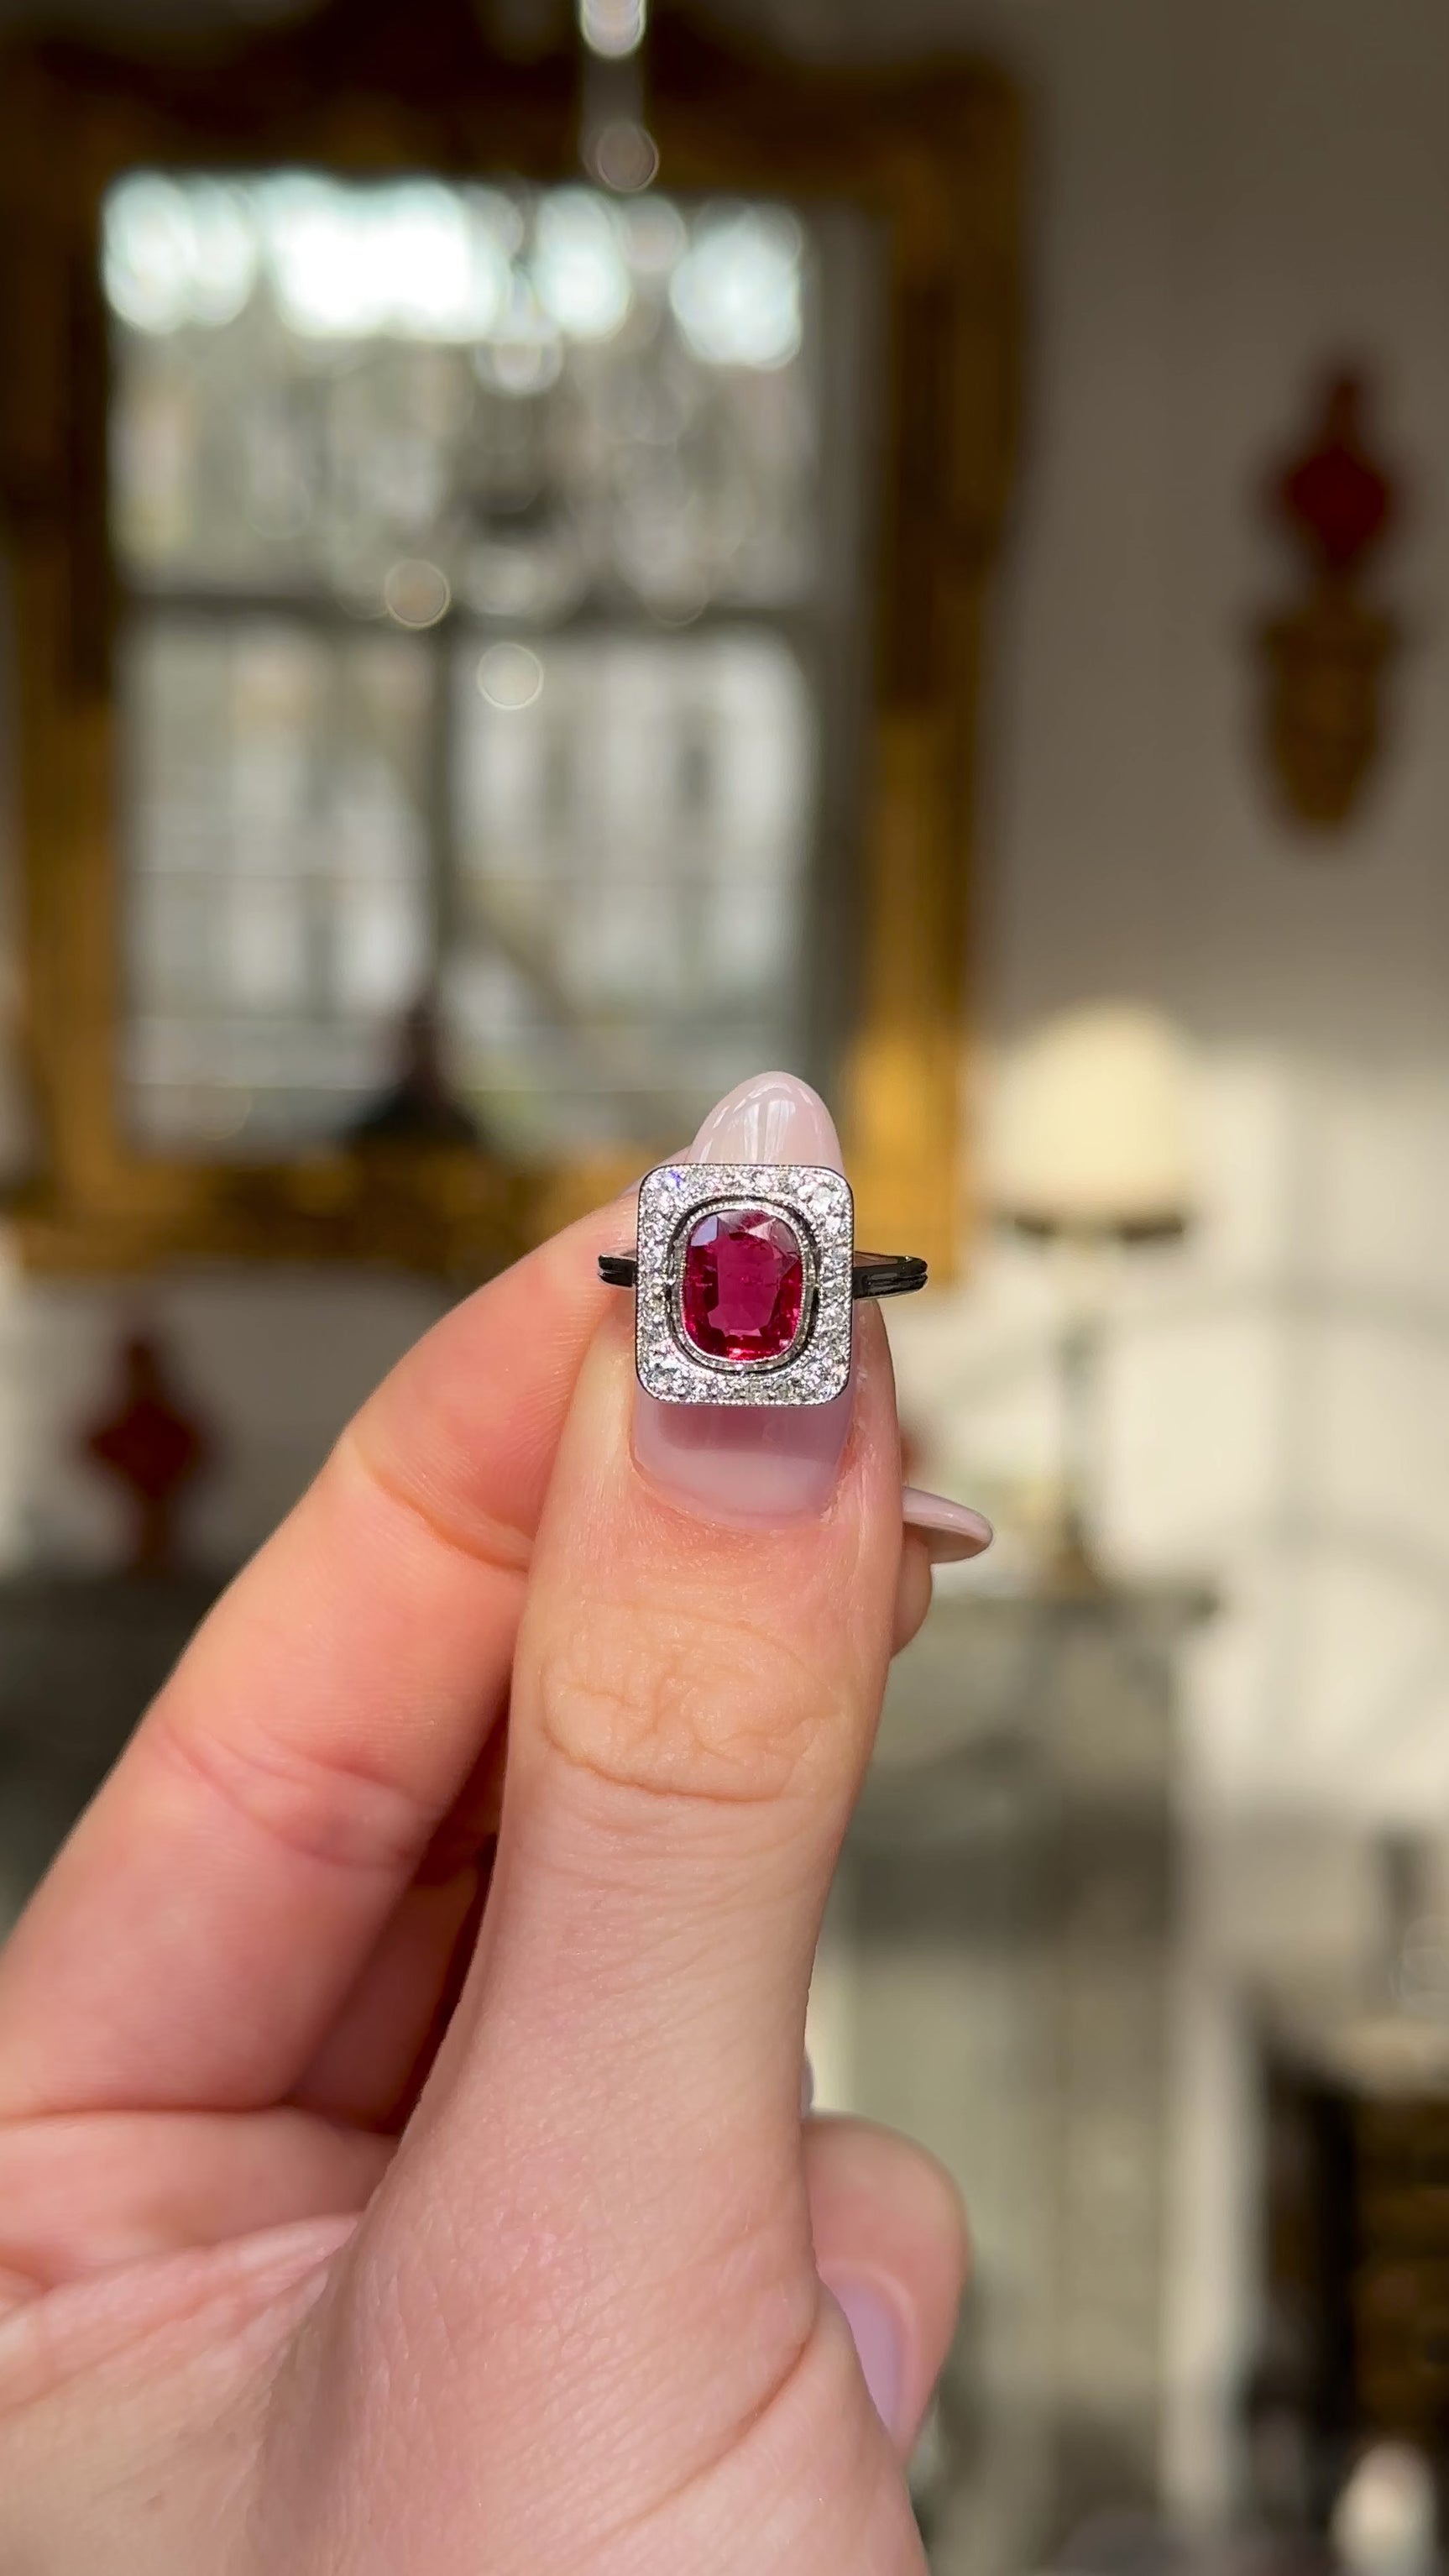 Vintage Art Deco ruby and diamond engagement ring held in fingers and moved around to give perspective.